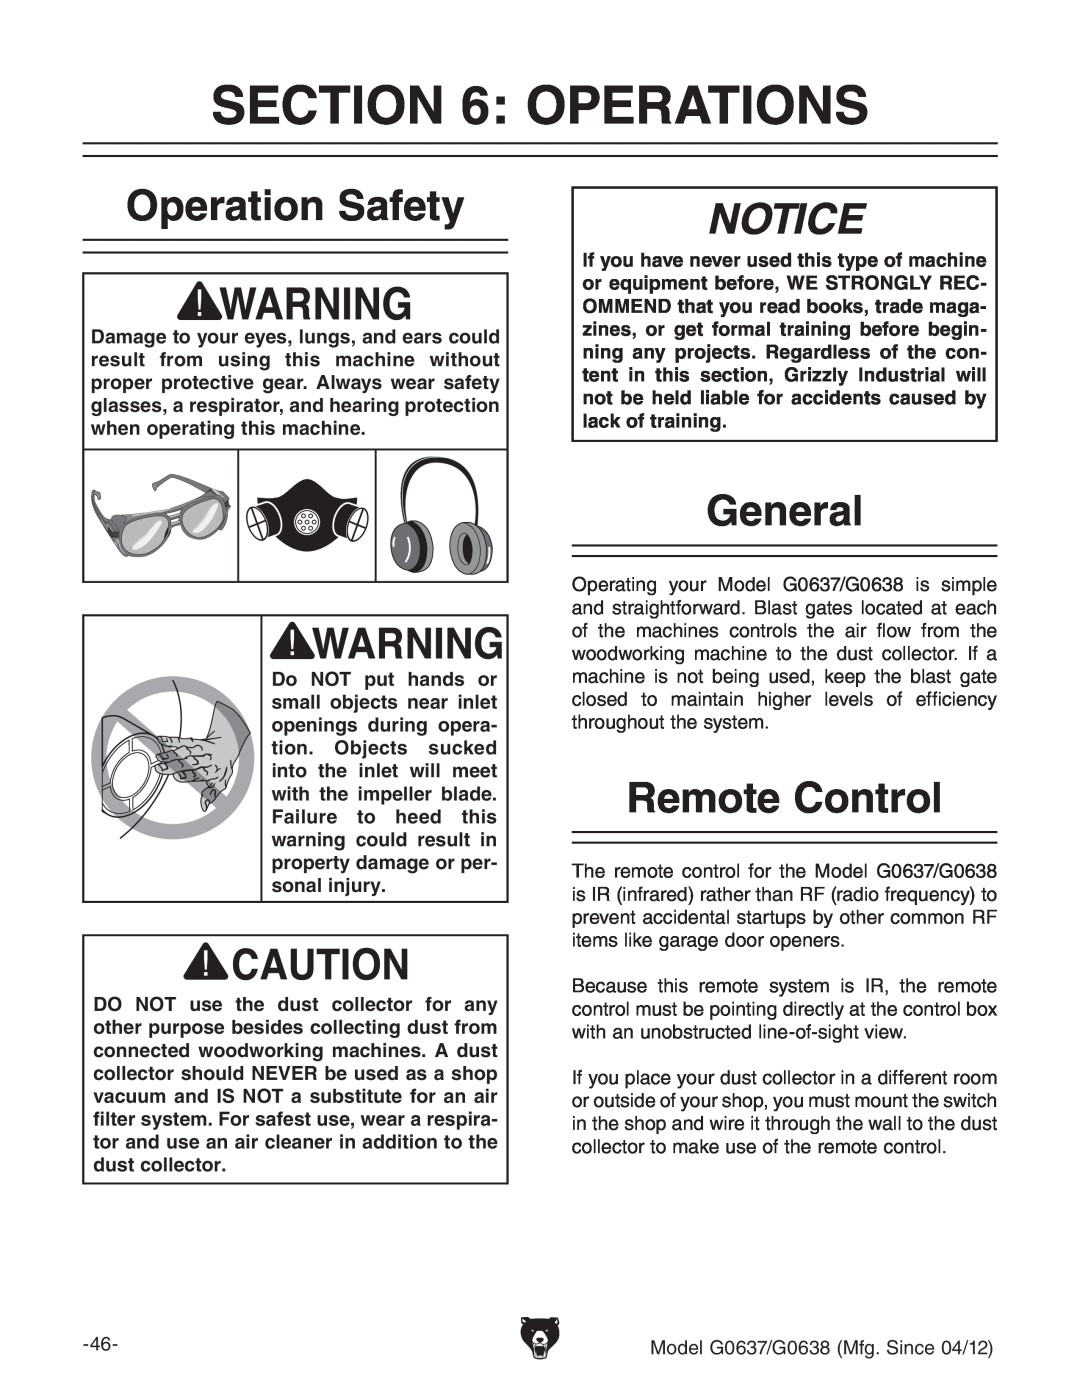 Grizzly G0637 owner manual Operations, Operation Safety, Remote Control, Notice, General 